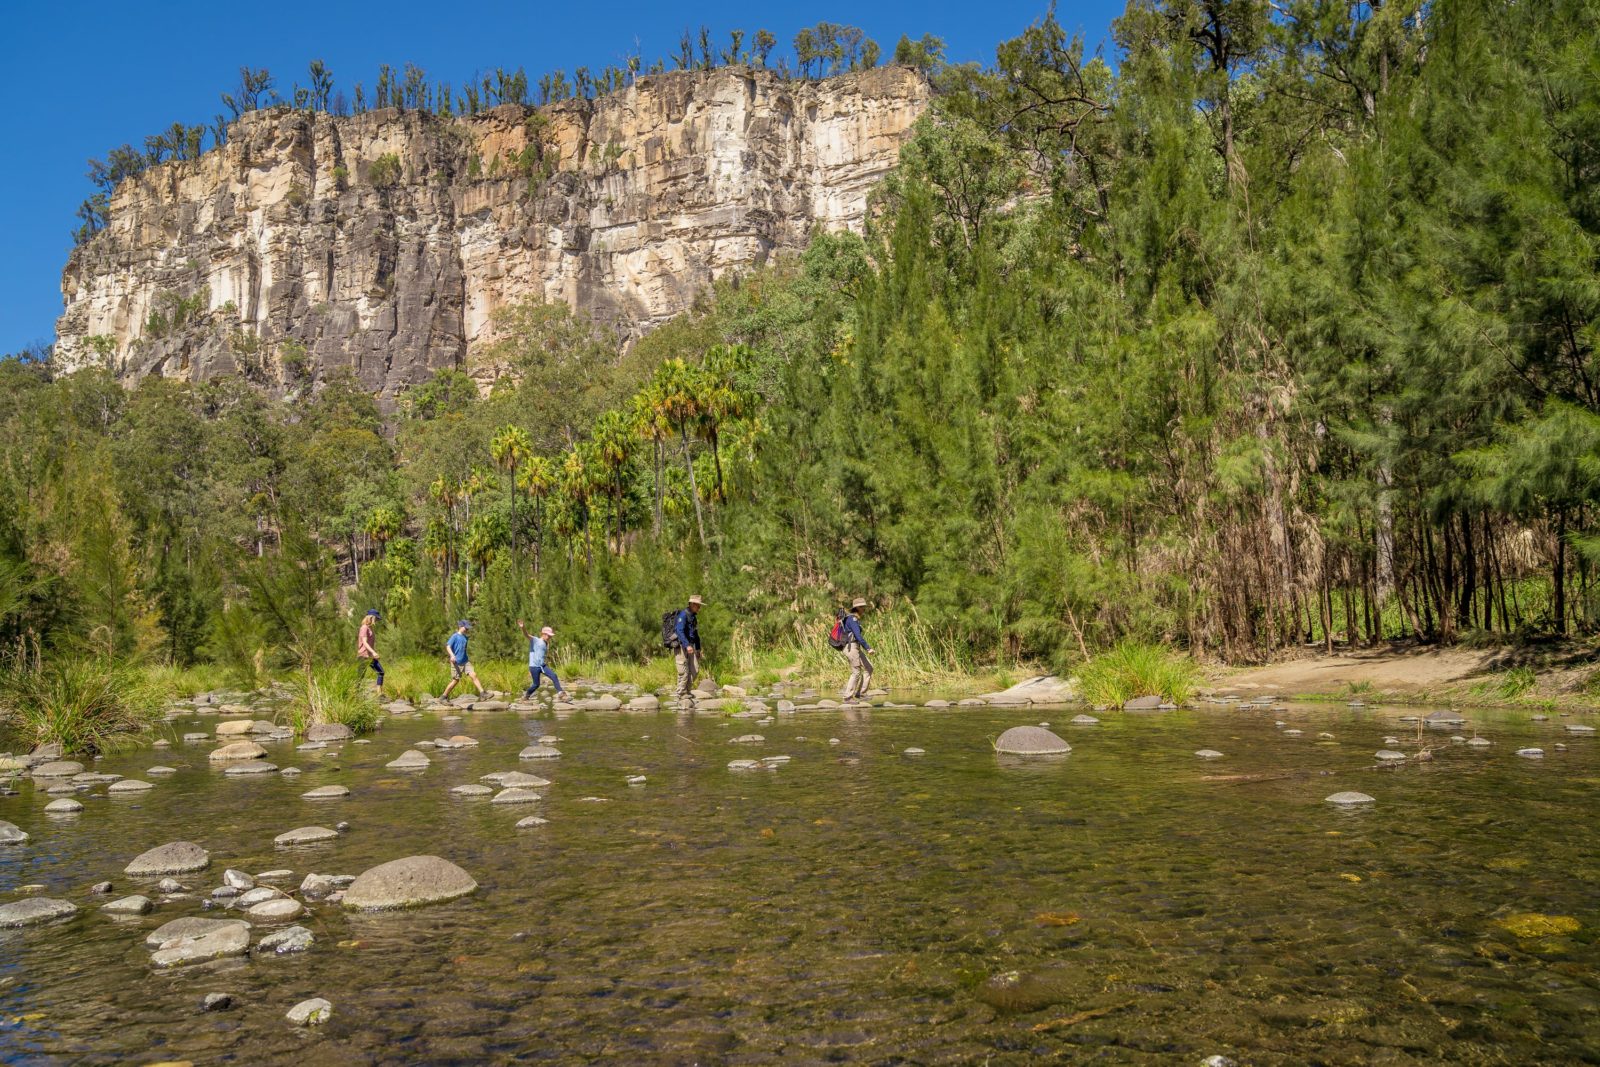 Tour group crosses a crystal clear creek at Carnarvon Gorge, with soaring sandstone cliffs behind.